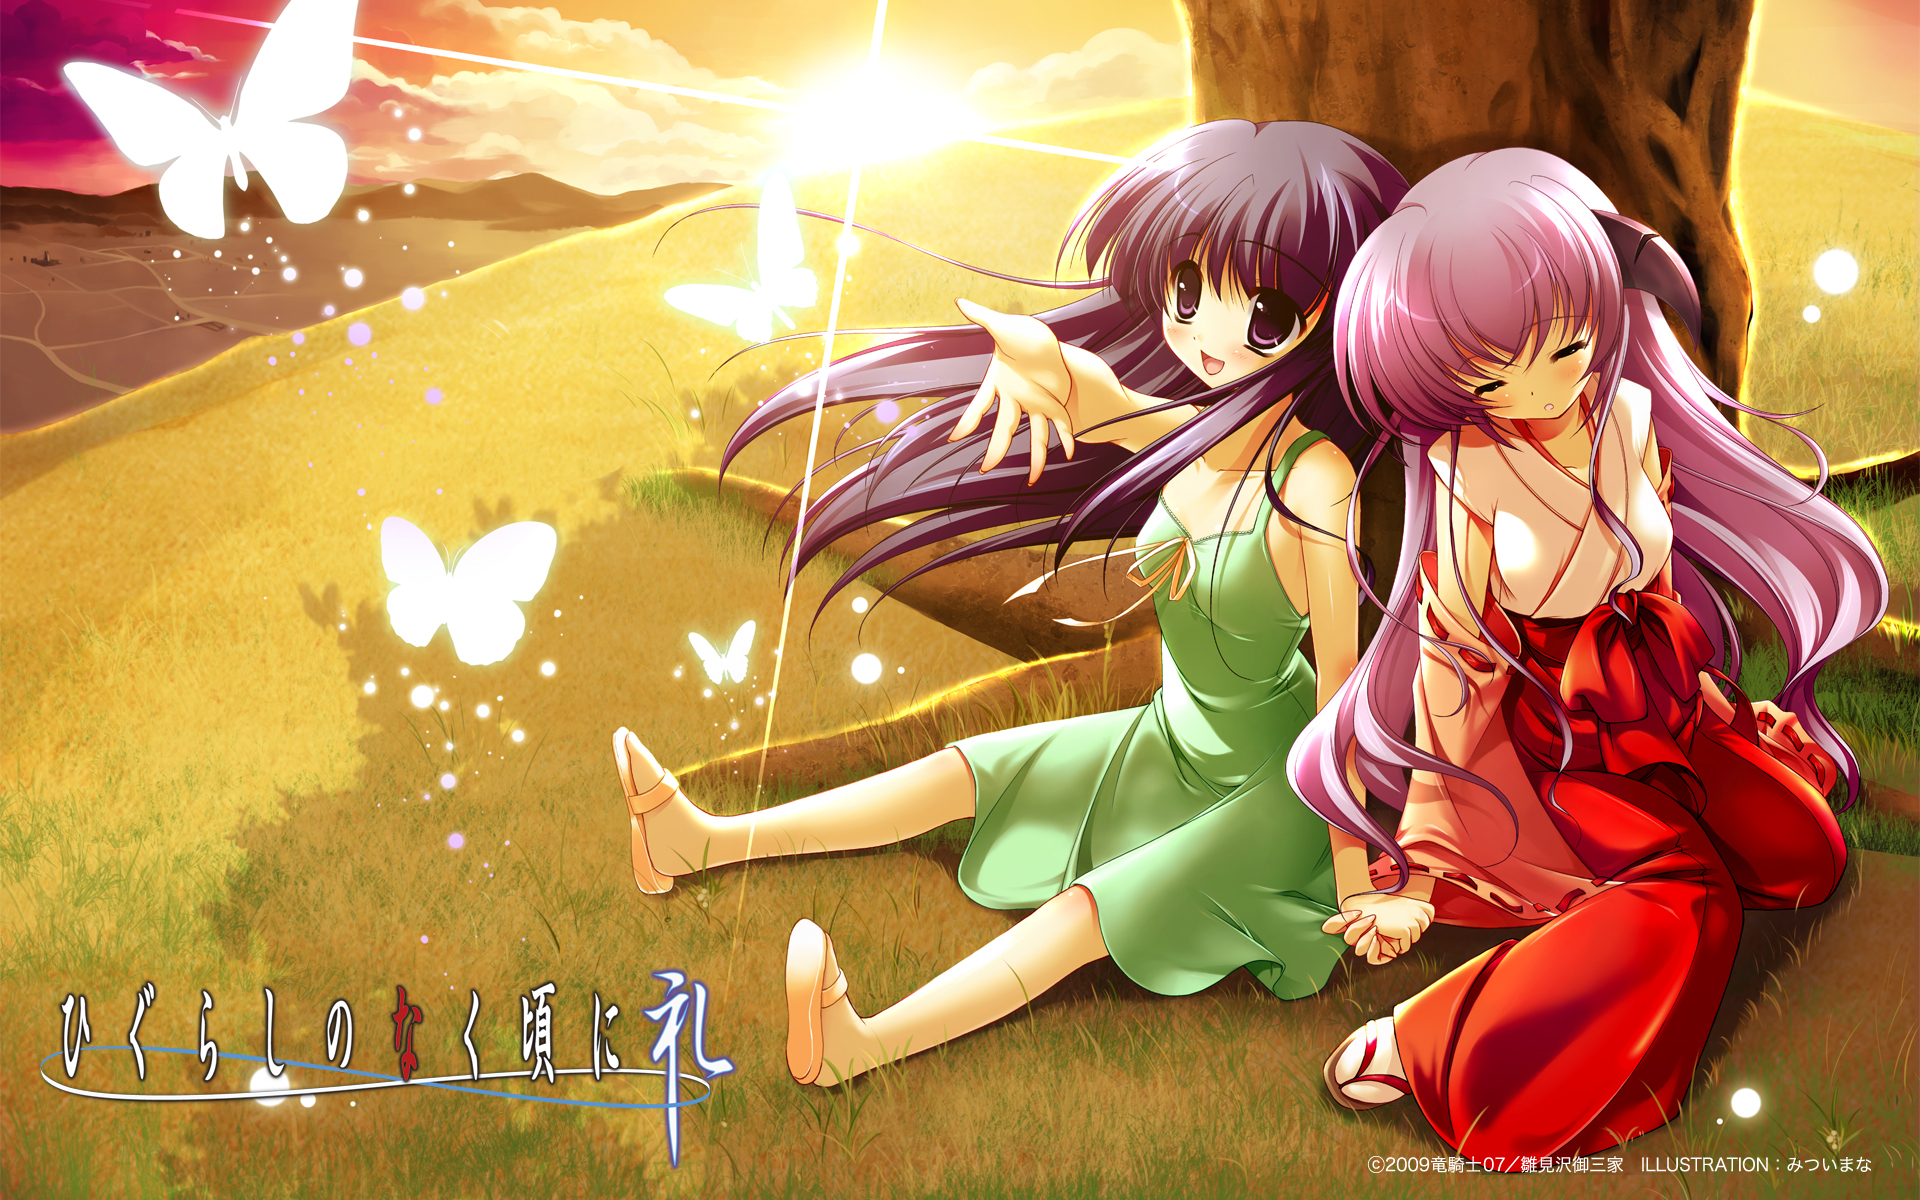 Anime characters Furude Rika and Furude Hanyū from When They Cry.